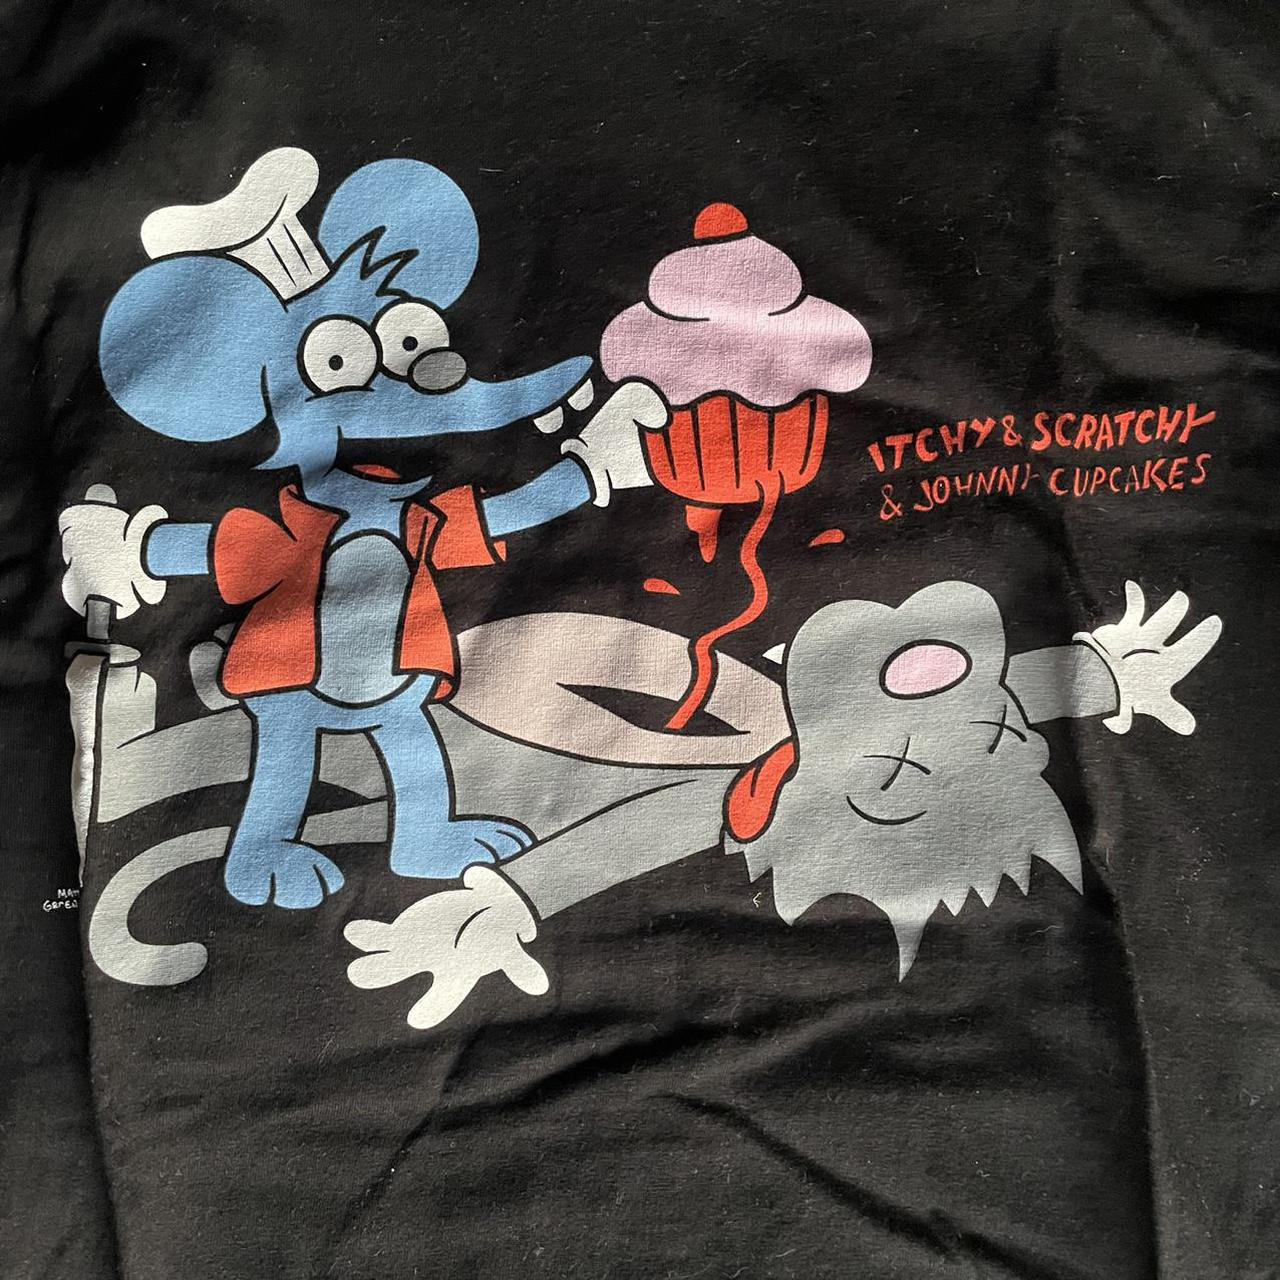 Product Image 2 - Johnny Cupcakes limited edition Itchy